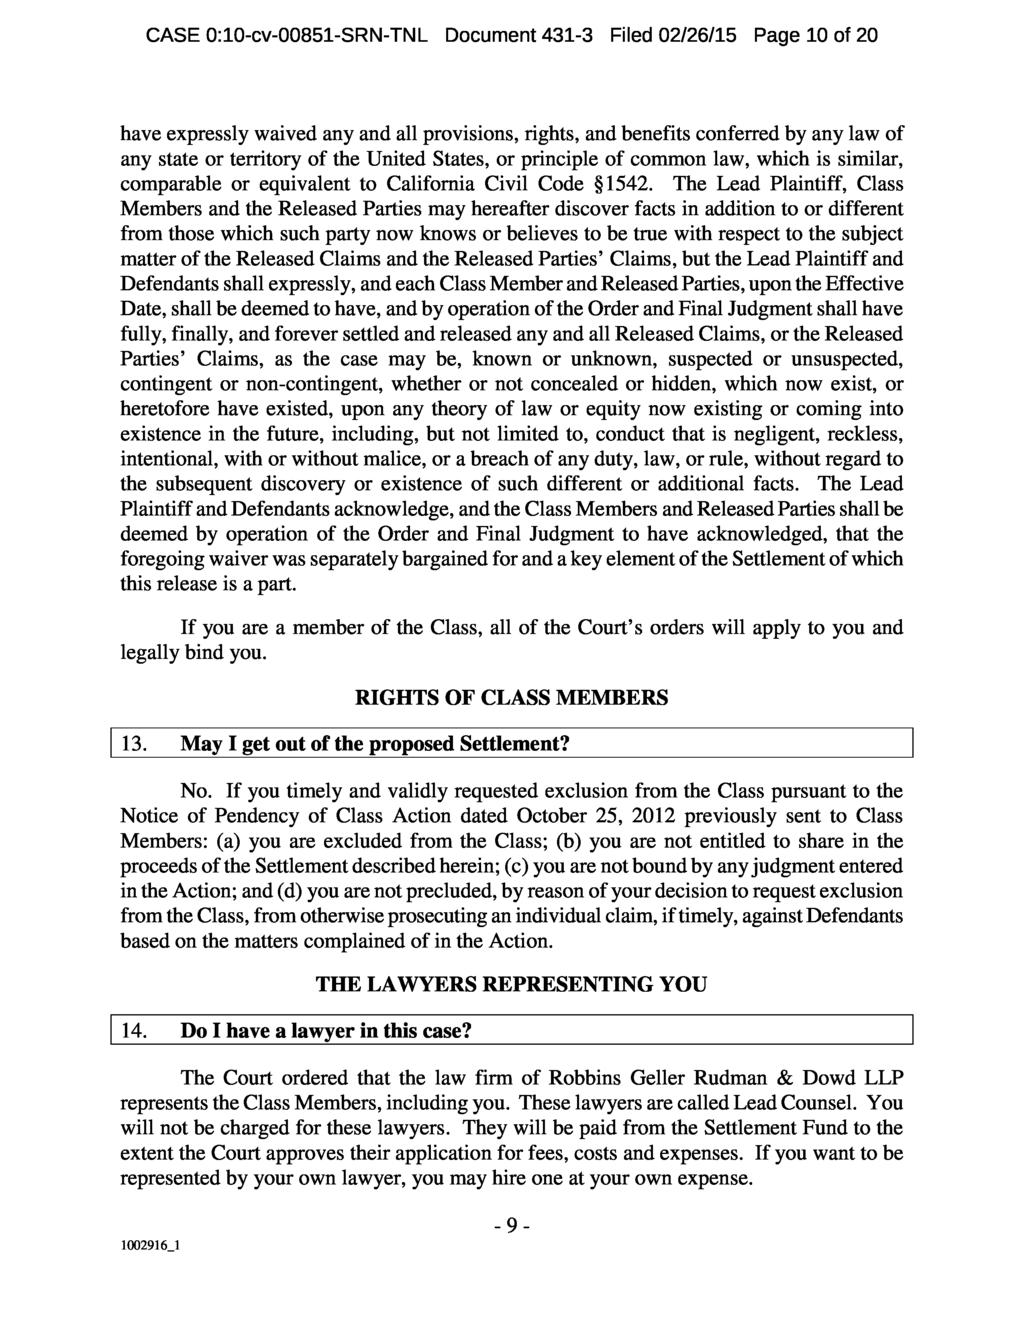 CASE 0:10-cv-00851-SRN-TNL Document 431-3 Filed 02/26/15 Page 10 of 20 have expressly waived any and all provisions, rights, and benefits conferred by any law of any state or territory of the United